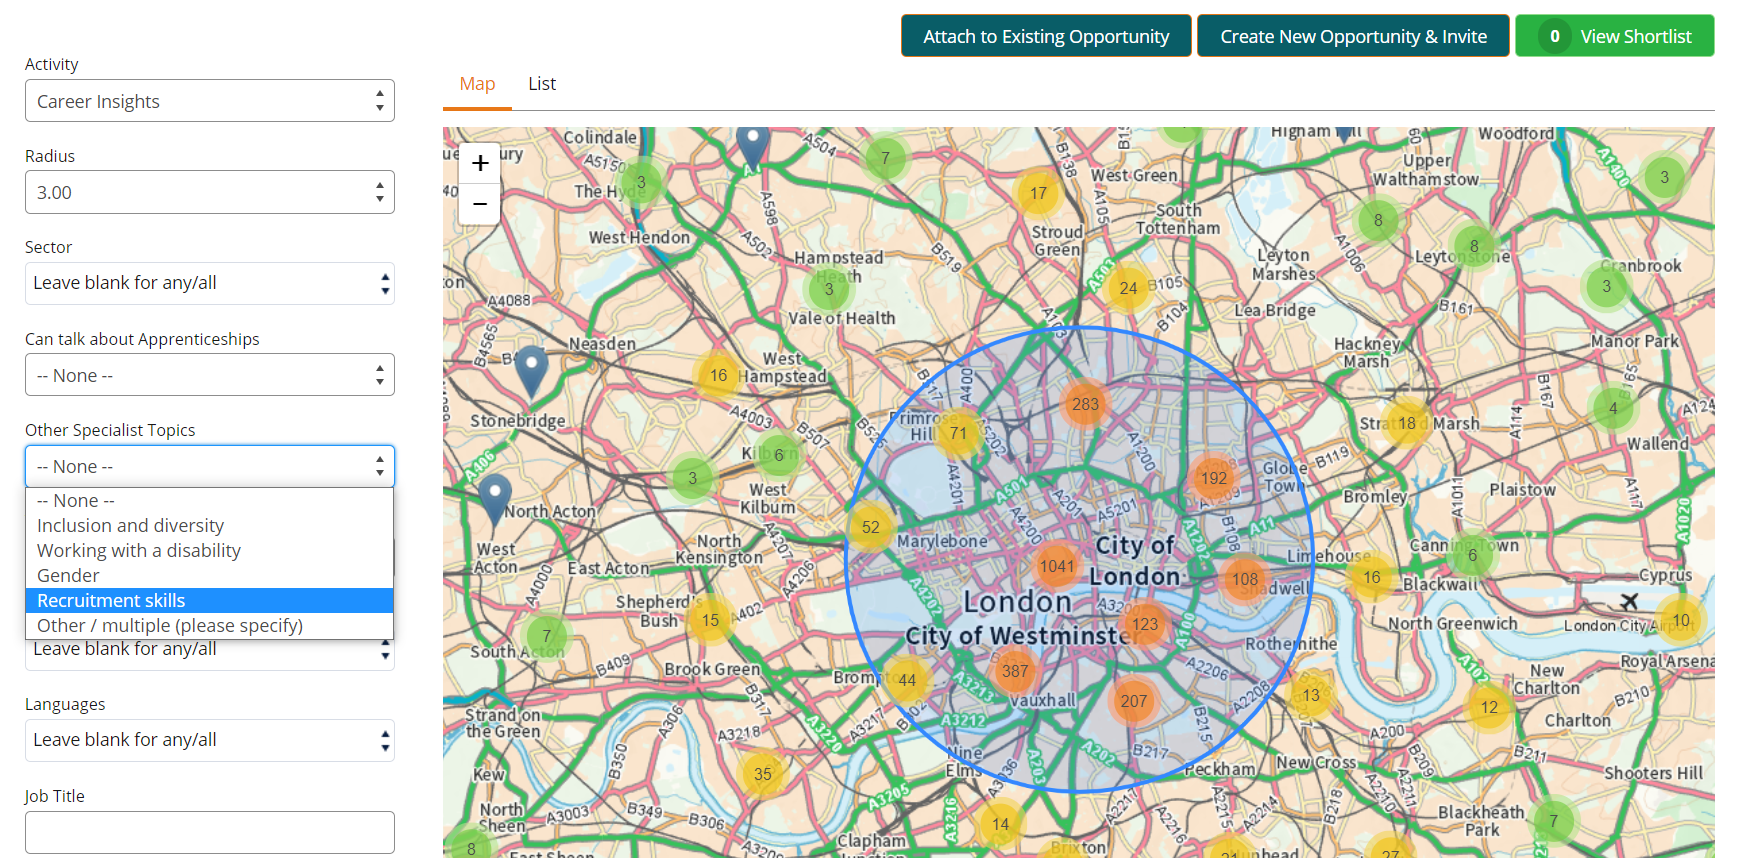 Searching for volunteers using the map view on the portal, with drop-down options on the left-hand side including "Other specialist topics": Inclusion and diversity, Working with a disability, Gender, Recruitment skills, Other